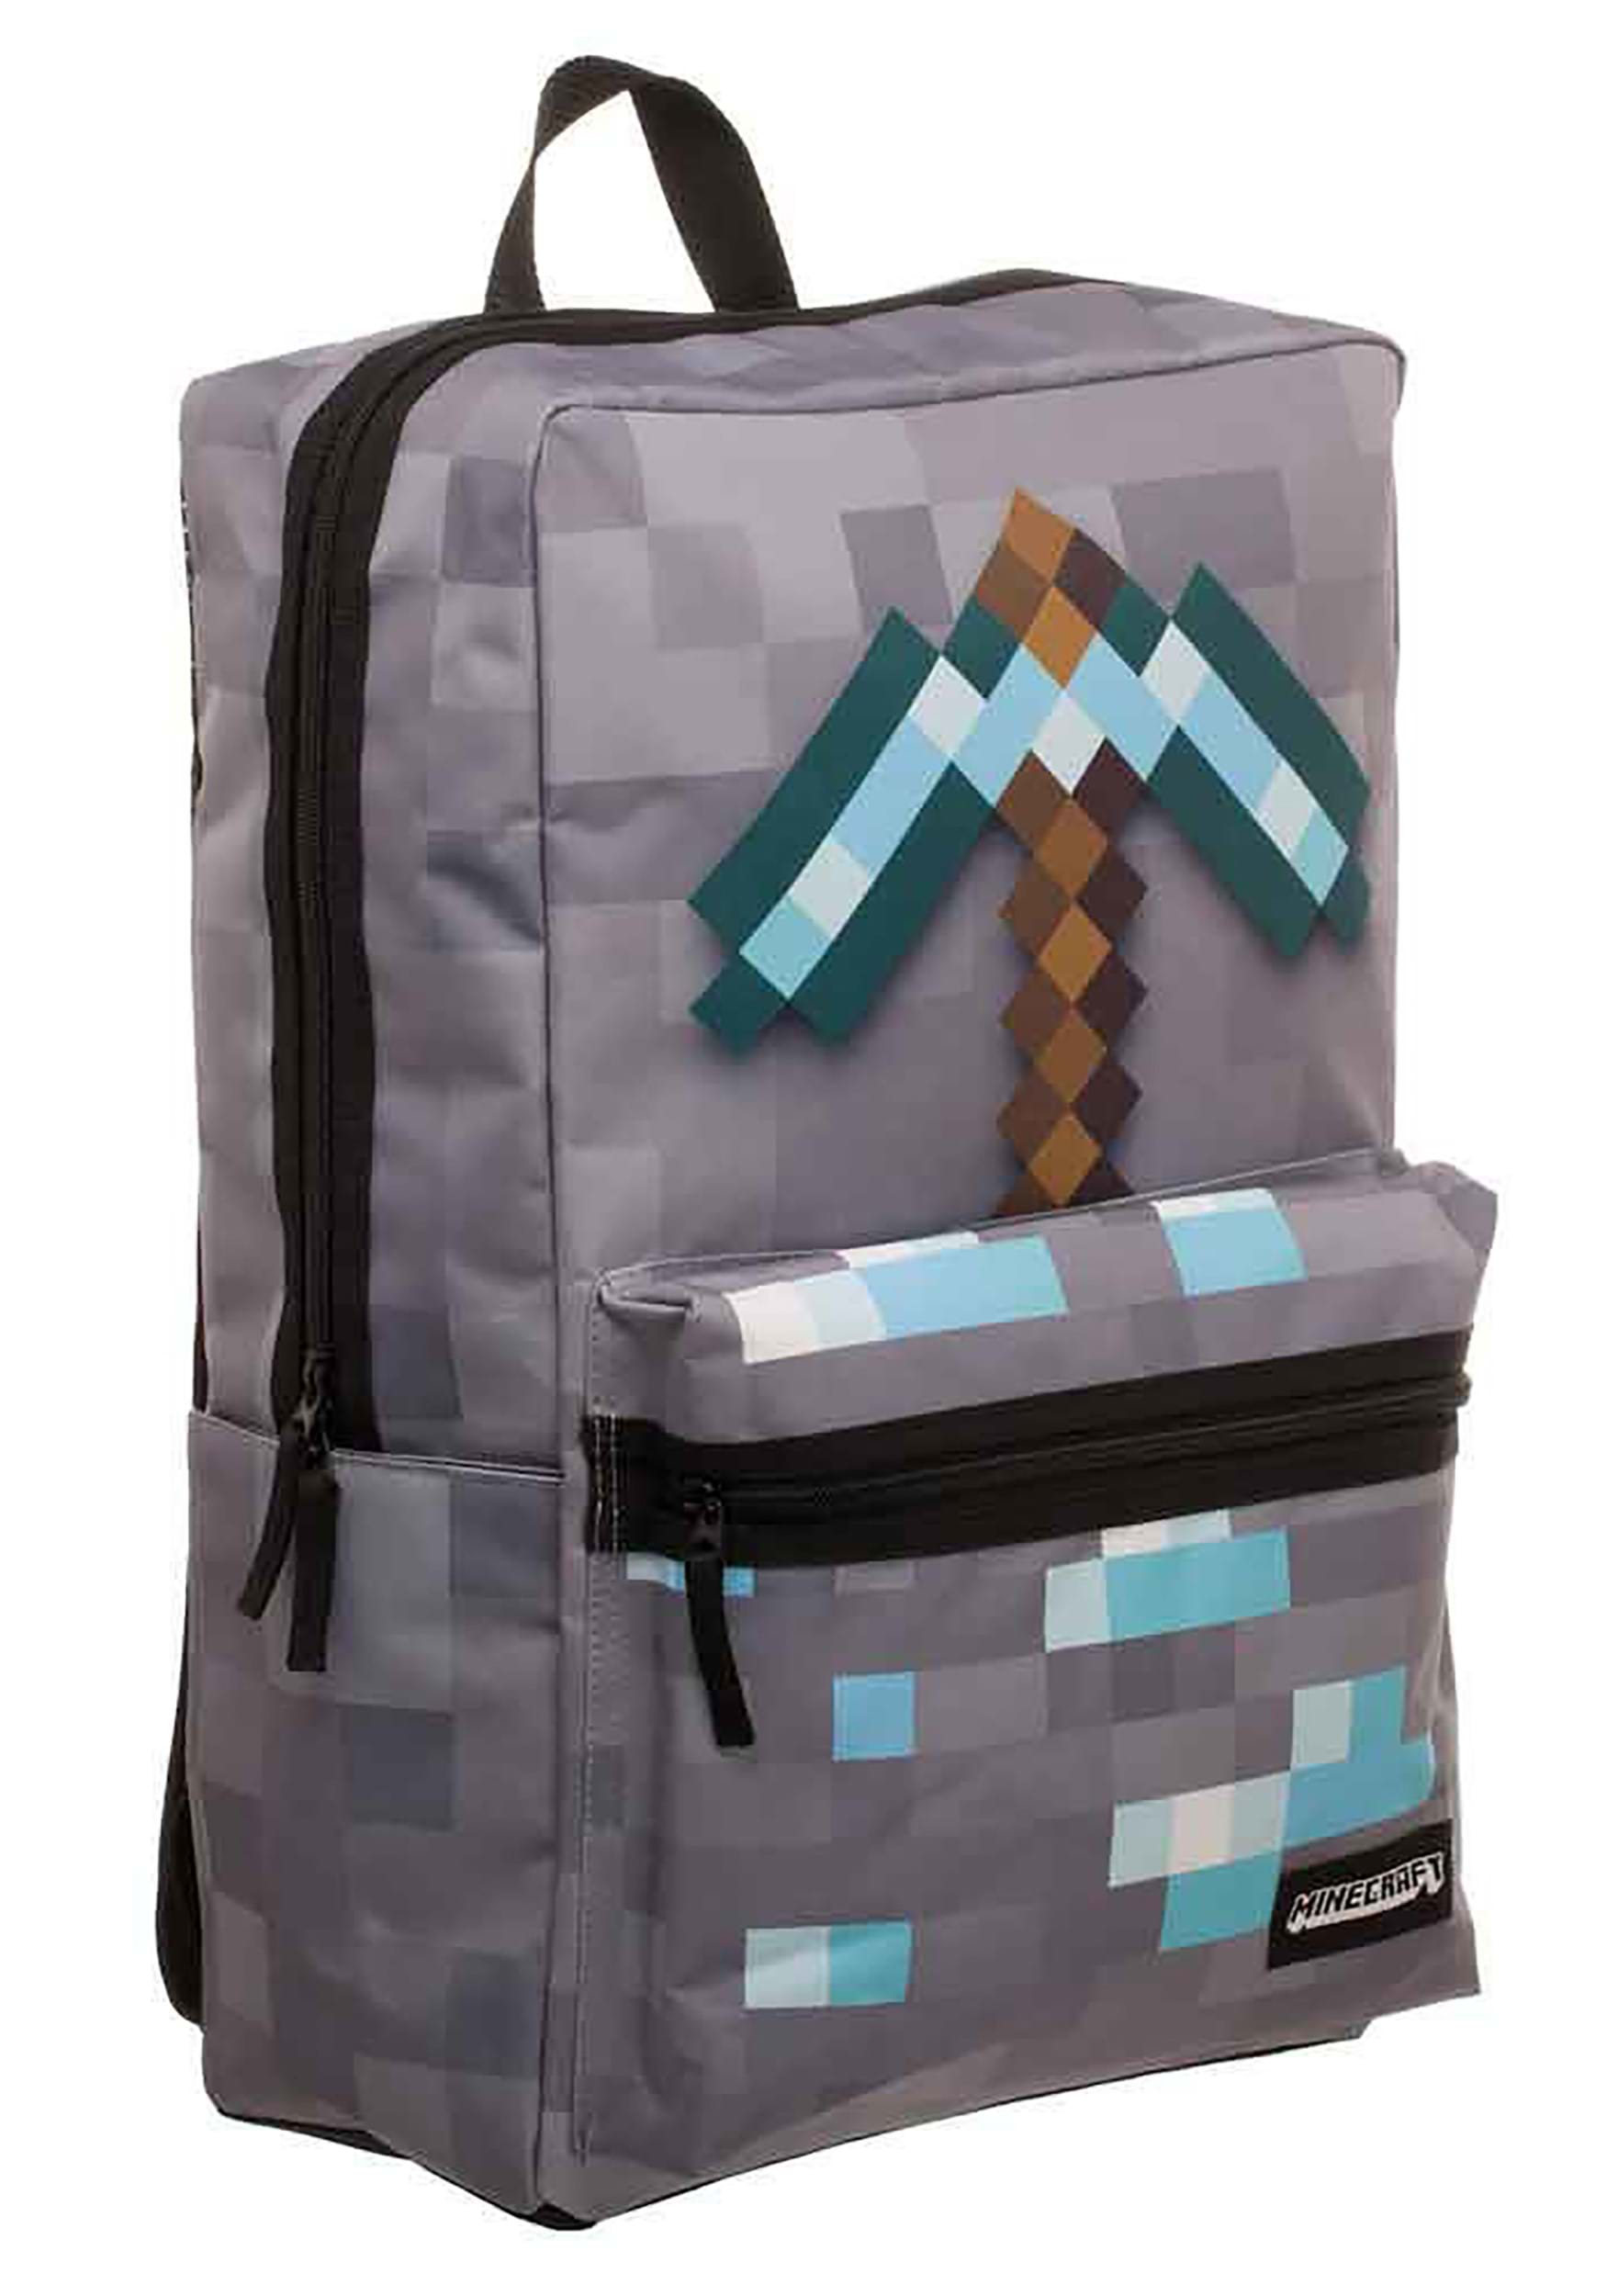 Minecraft Pickaxe Patch Laptop Backpack